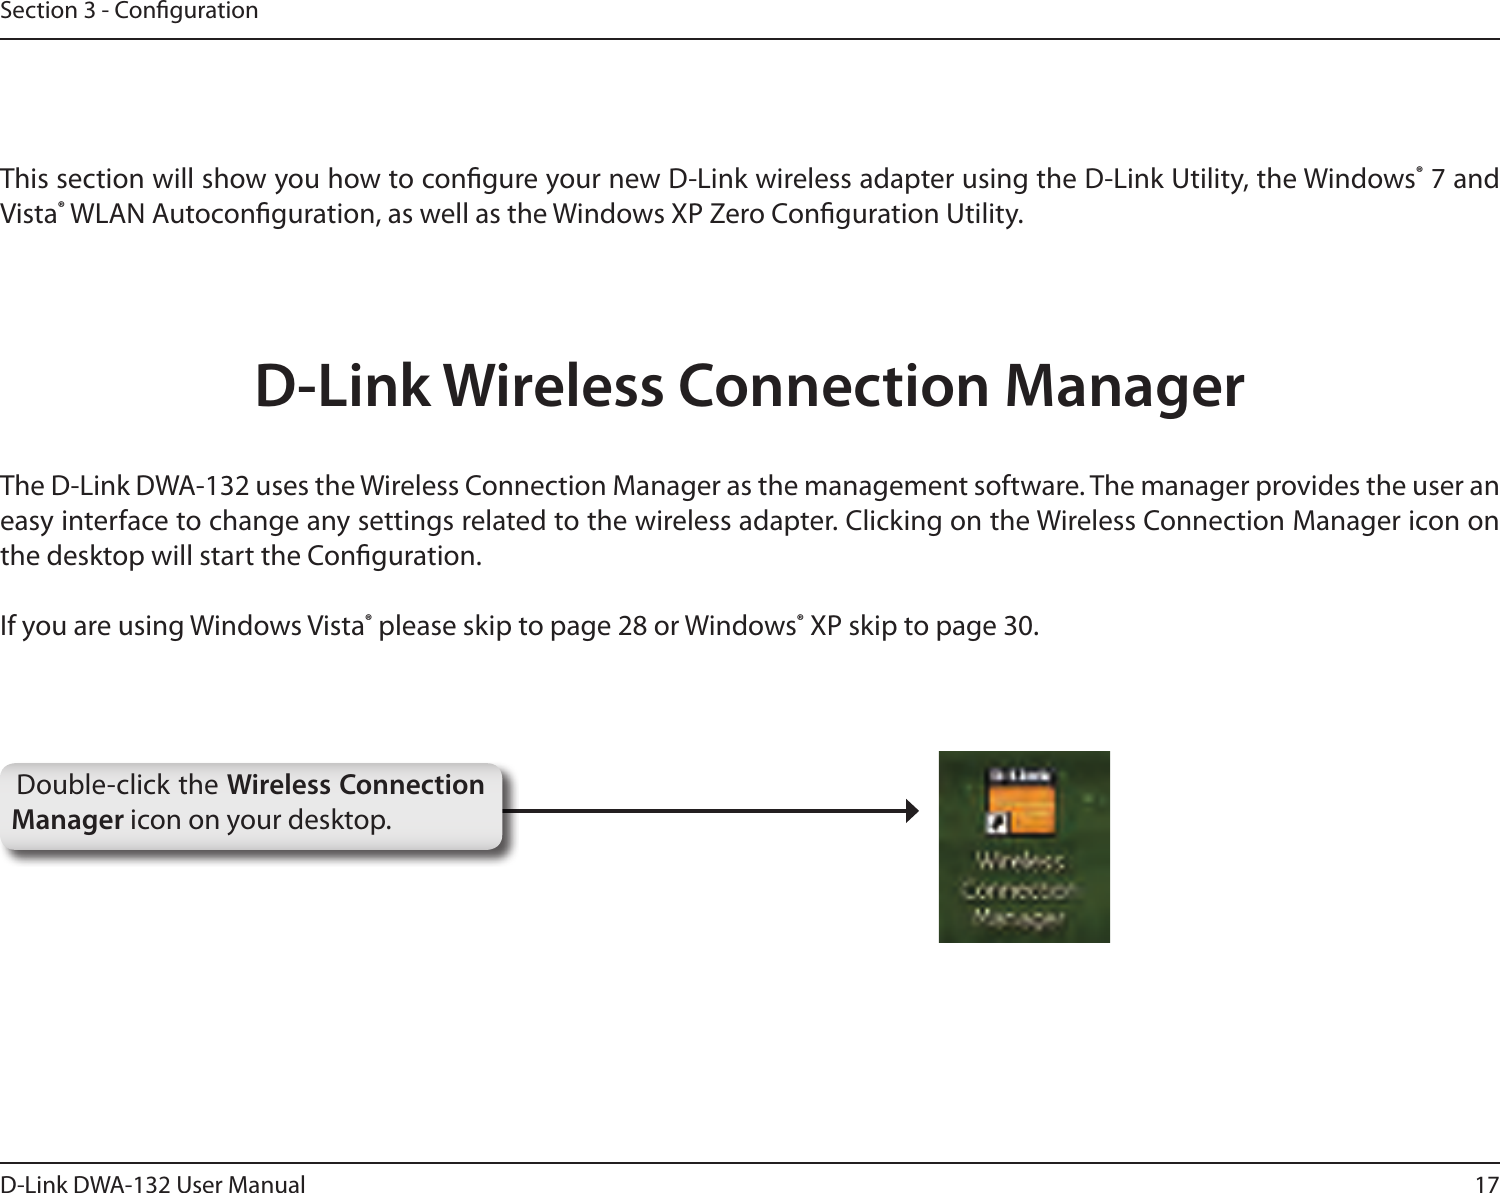 17D-Link DWA-132 User ManualSection 3 - CongurationThis section will show you how to congure your new D-Link wireless adapter using the D-Link Utility, the Windows® 7 and Vista® WLAN Autoconguration, as well as the Windows XP Zero Conguration Utility.D-Link Wireless Connection ManagerThe D-Link DWA-132 uses the Wireless Connection Manager as the management software. The manager provides the user an easy interface to change any settings related to the wireless adapter. Clicking on the Wireless Connection Manager icon on the desktop will start the Conguration.If you are using Windows Vista® please skip to page 28 or Windows® XP skip to page 30.Double-click the Wireless Connection Manager icon on your desktop.